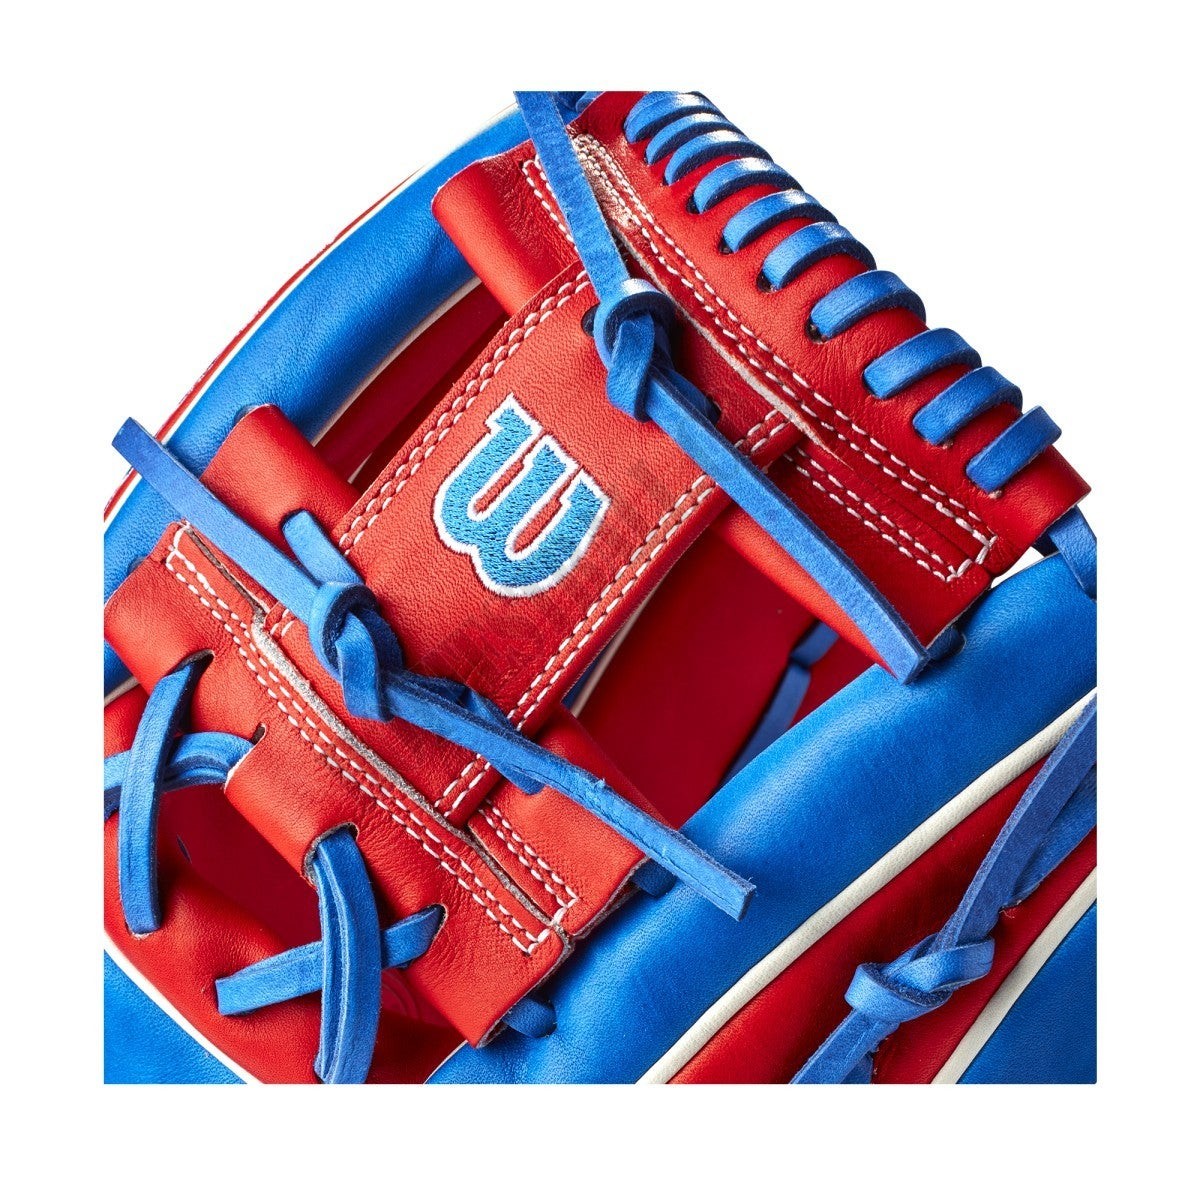 2021 A2000 1786 Puerto Rico 11.5" Infield Baseball Glove - Limited Edition ● Wilson Promotions - -5